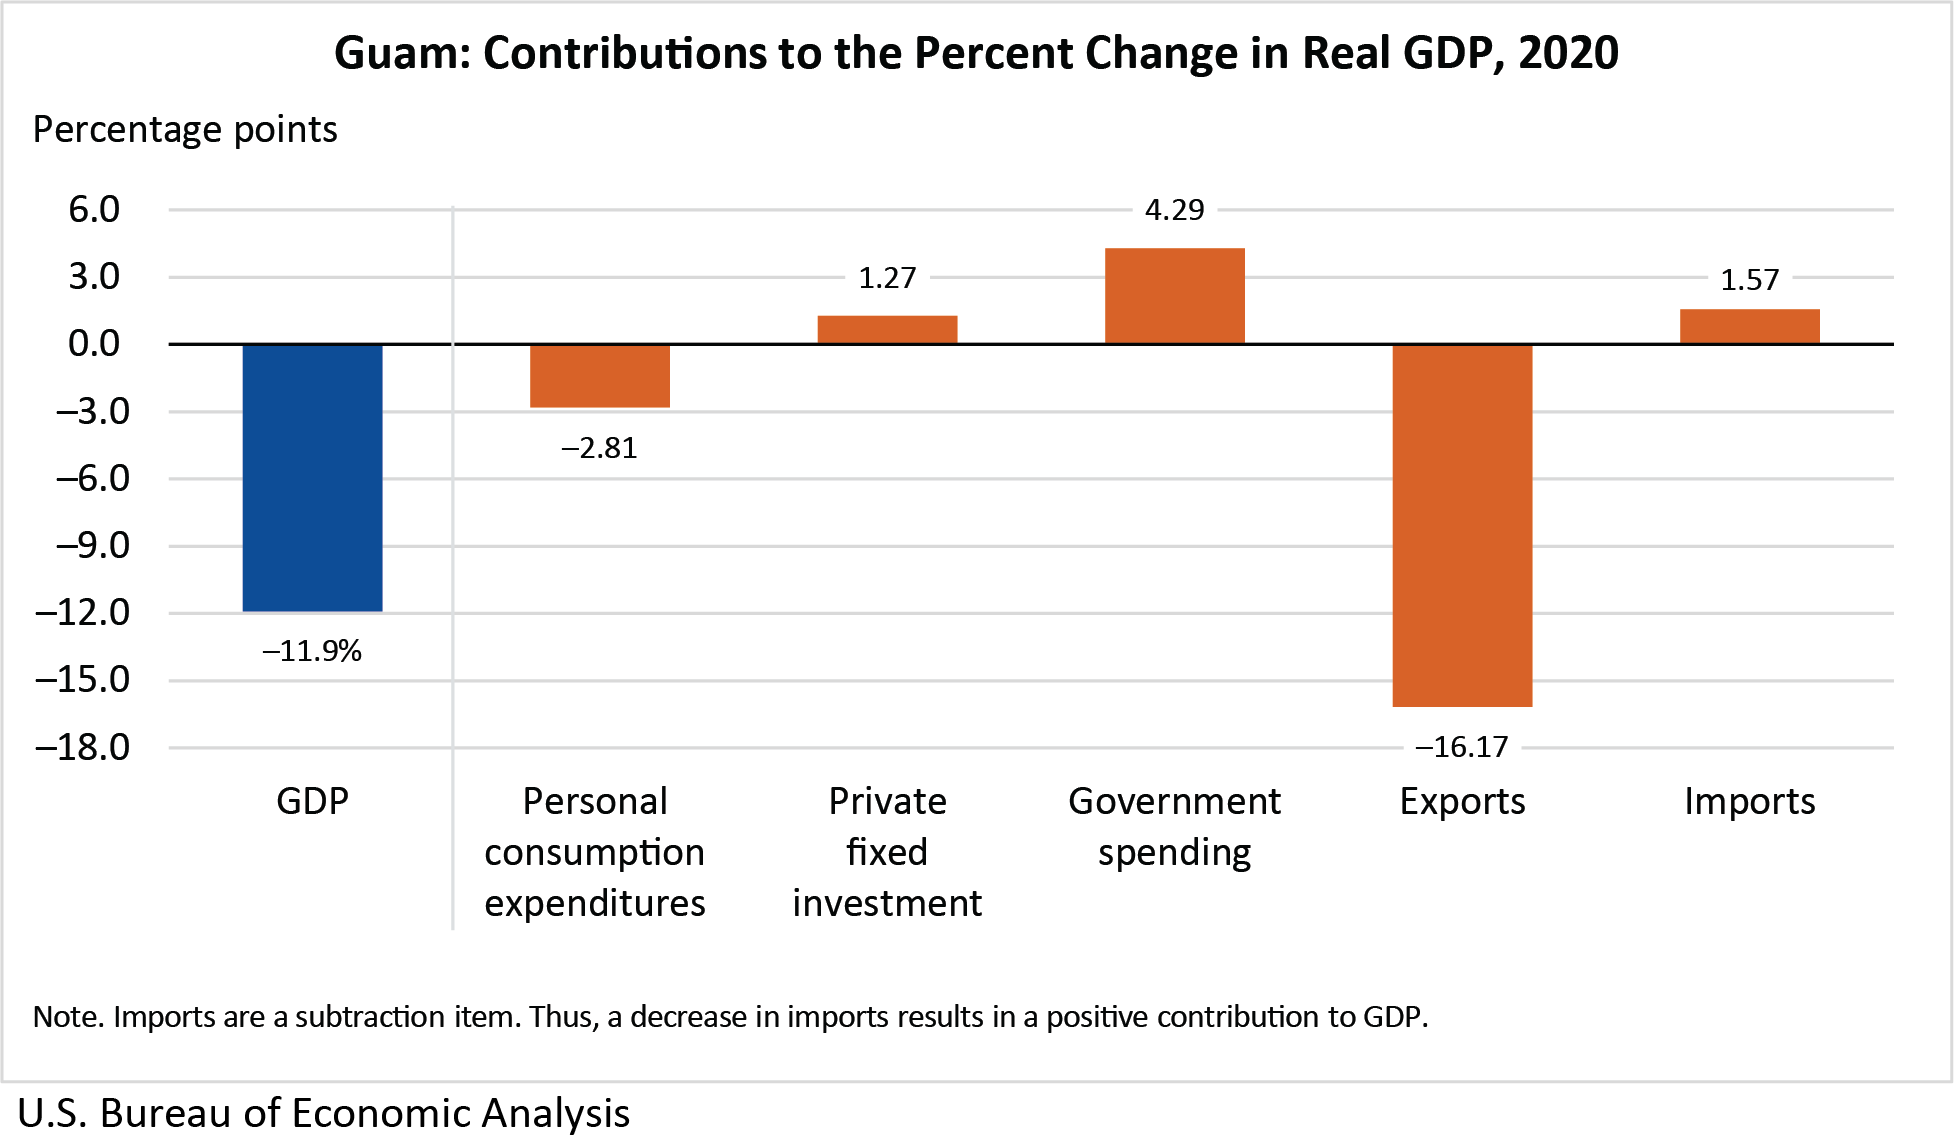 Guam: Contributions to the Percent Change in Real GDP, 2020